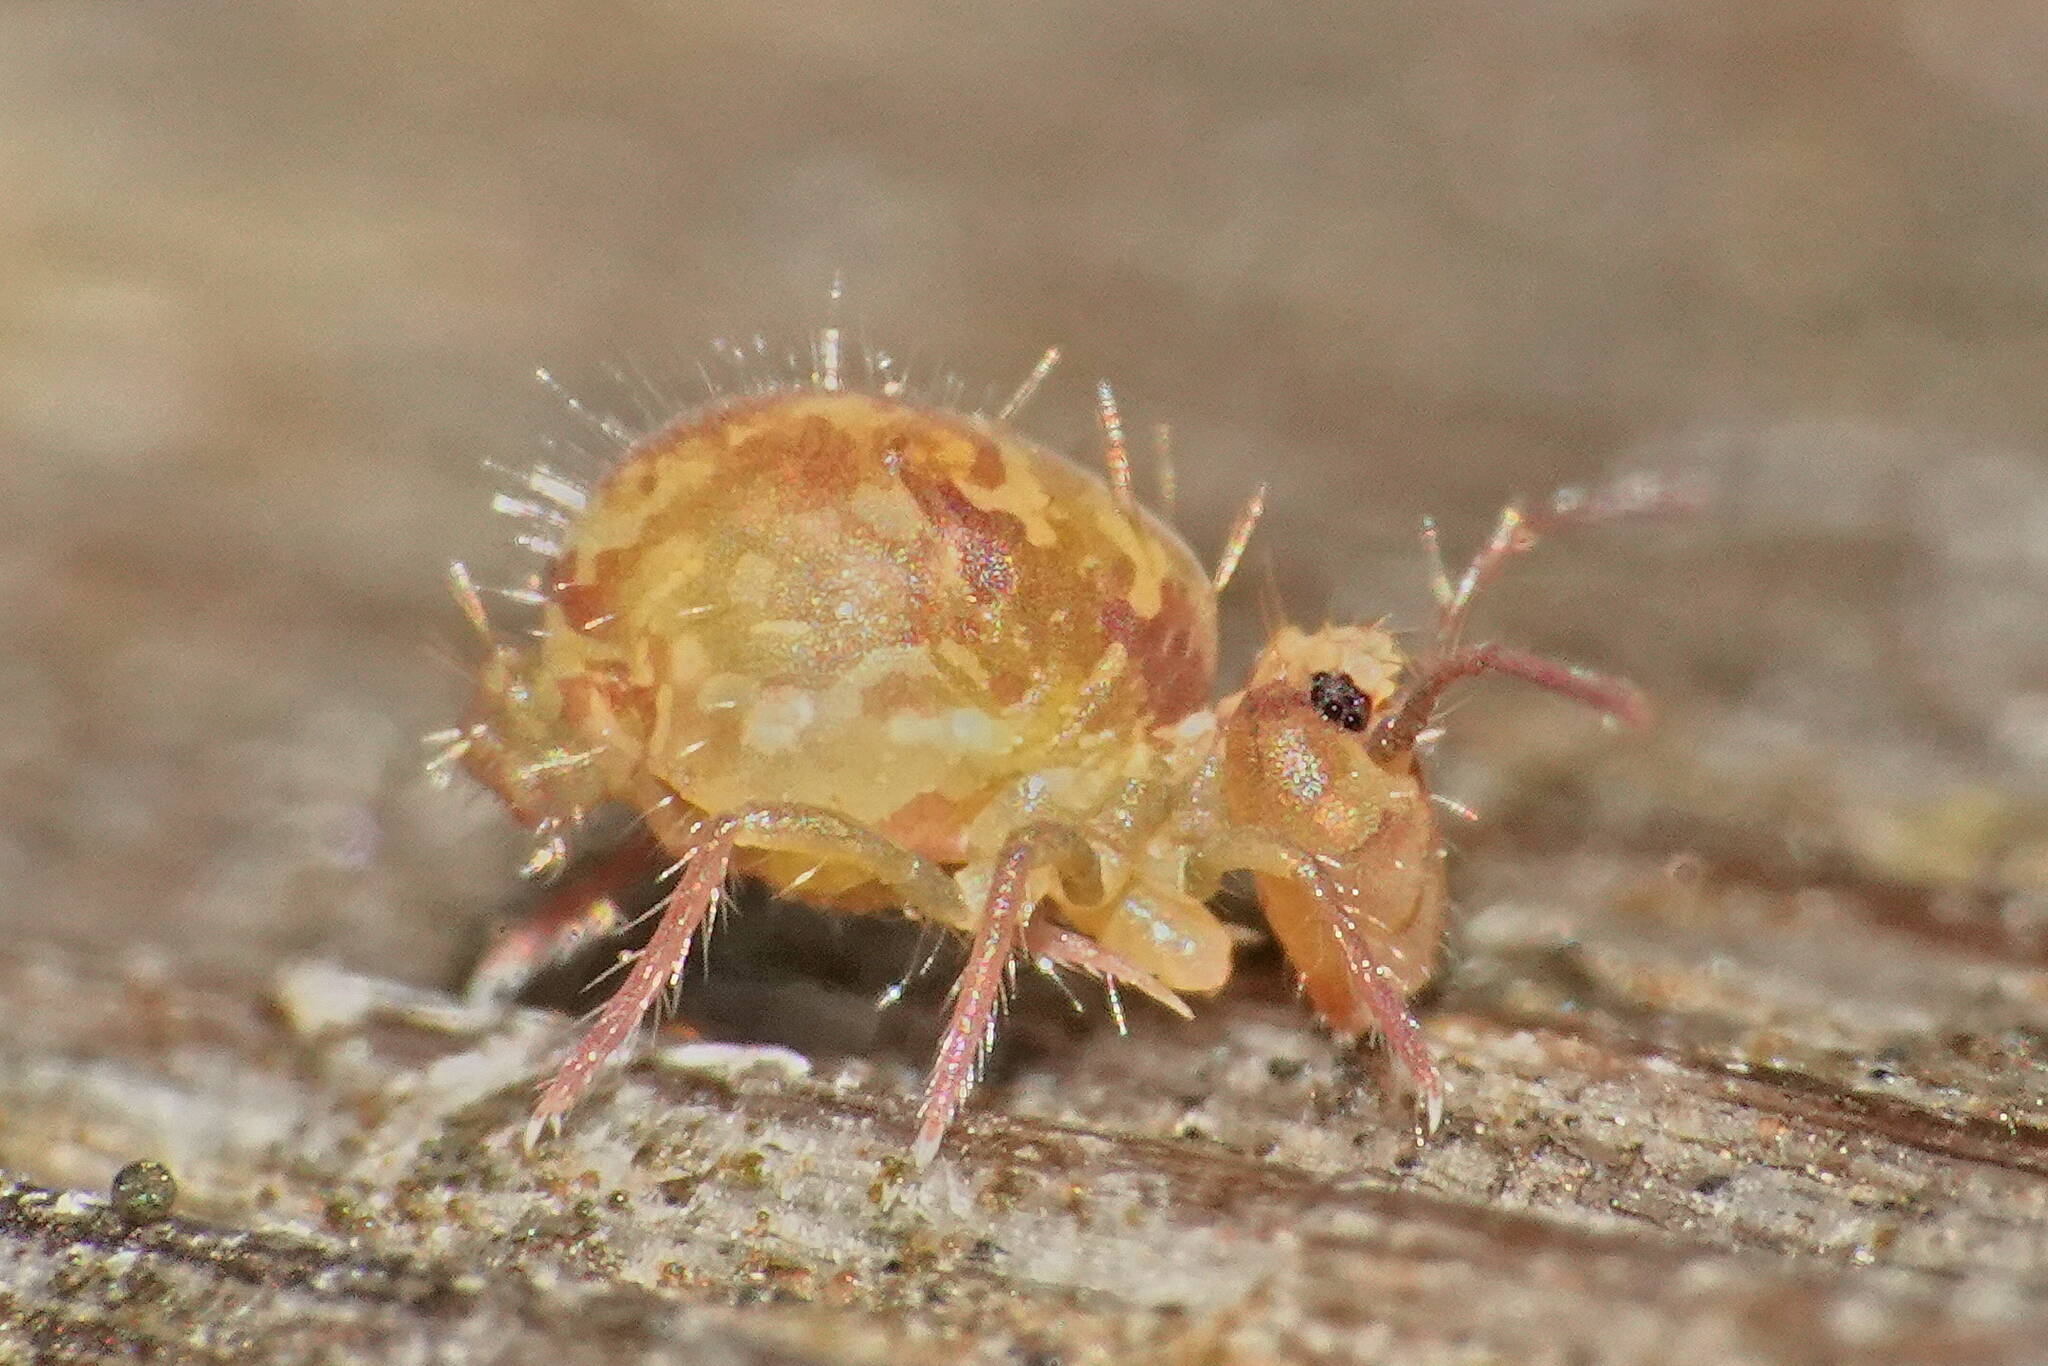 A springtail perches on a wood railing, perhaps to eat microalgae. (Photo by Bob Armstrong)